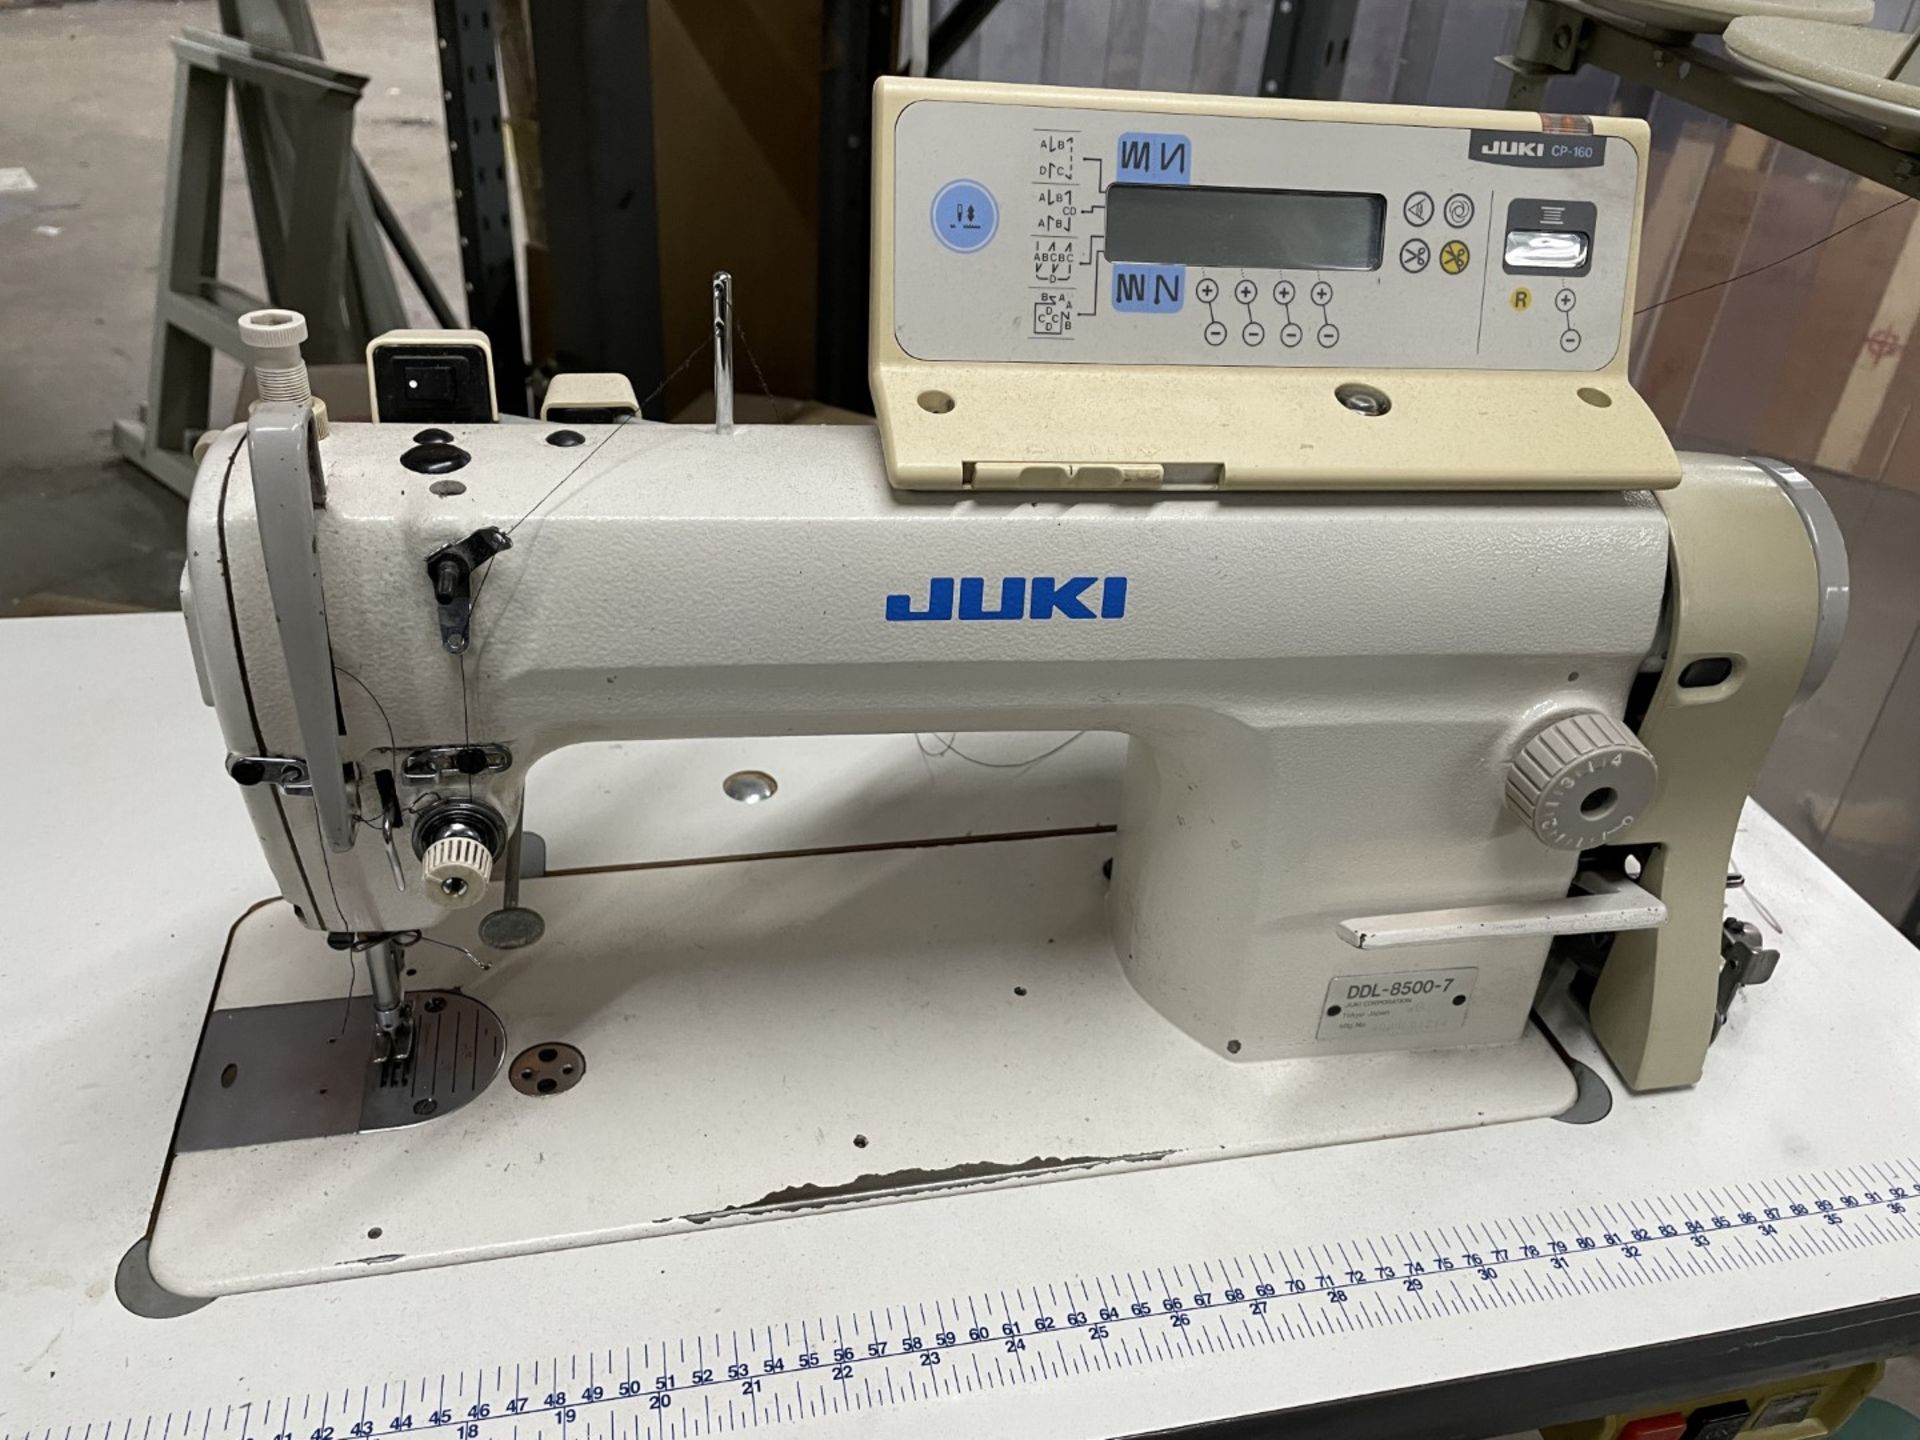 1 x Juki DDL850 Single Needle Automatic Lockstitch Industrial Sewing Machine With Table